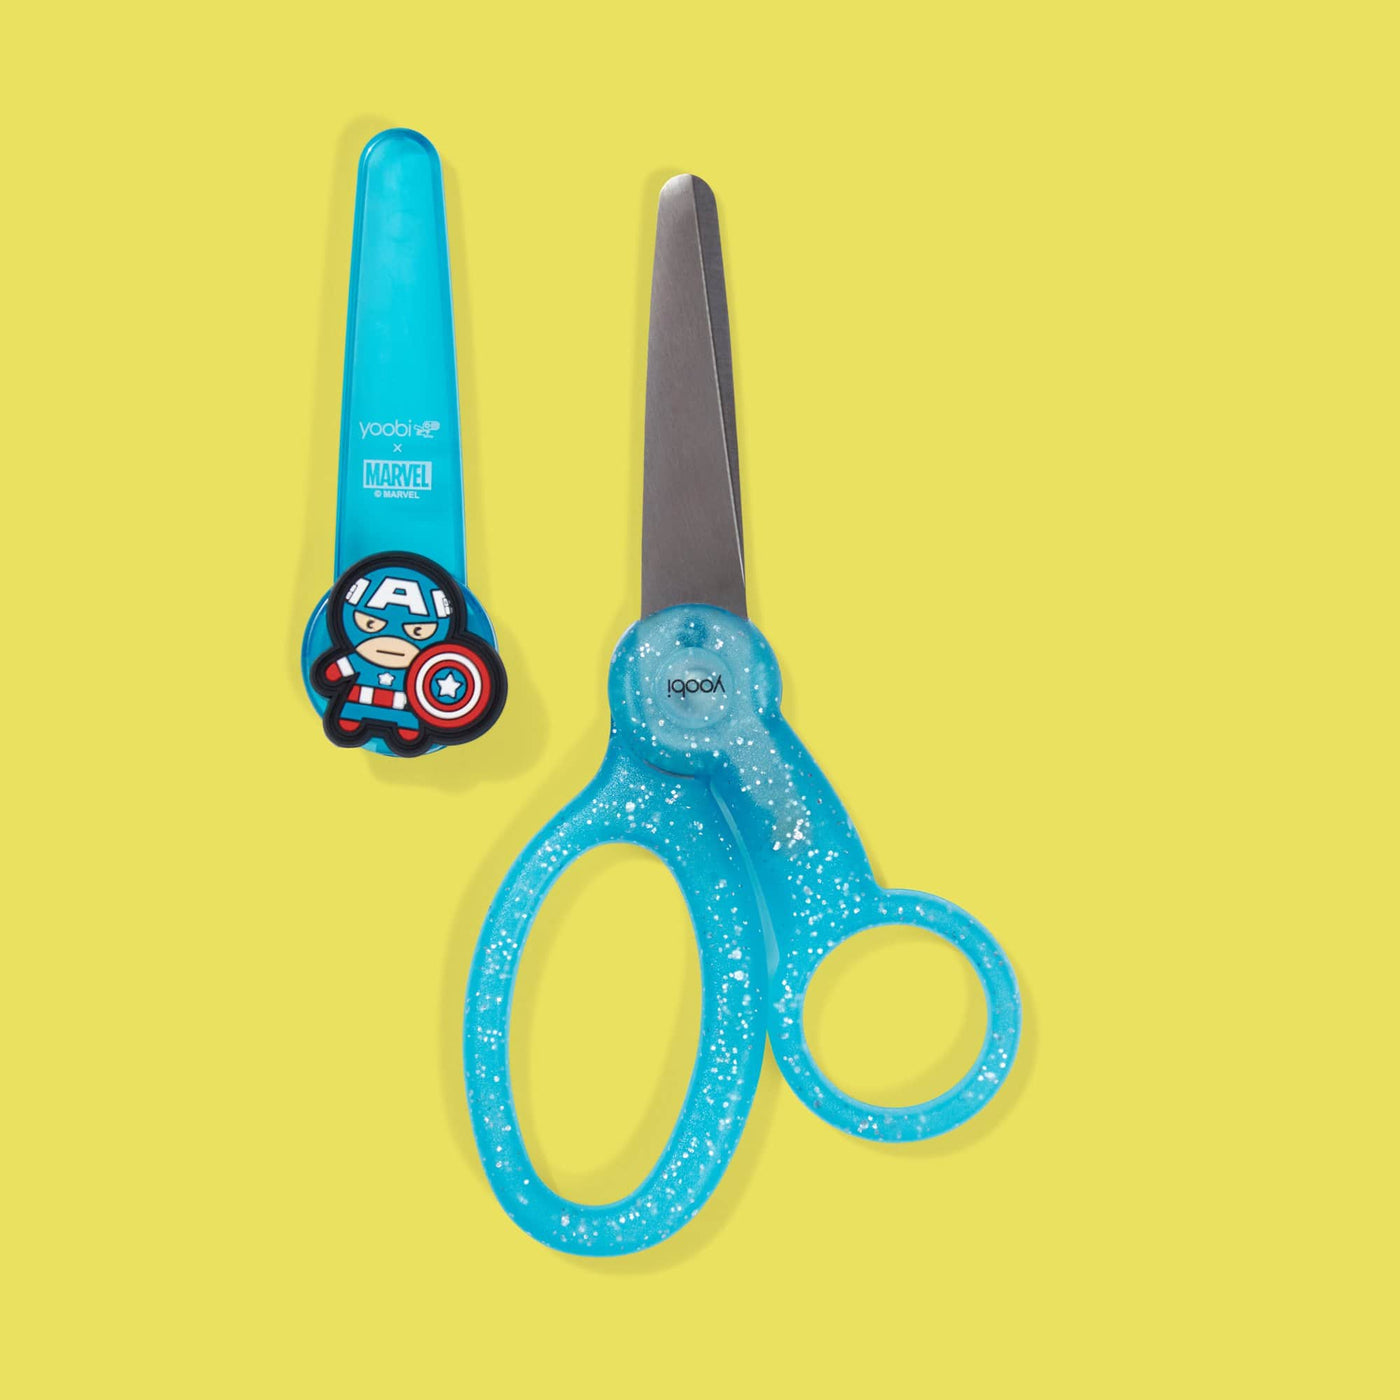 Captain America kids scissors with blade cover removed